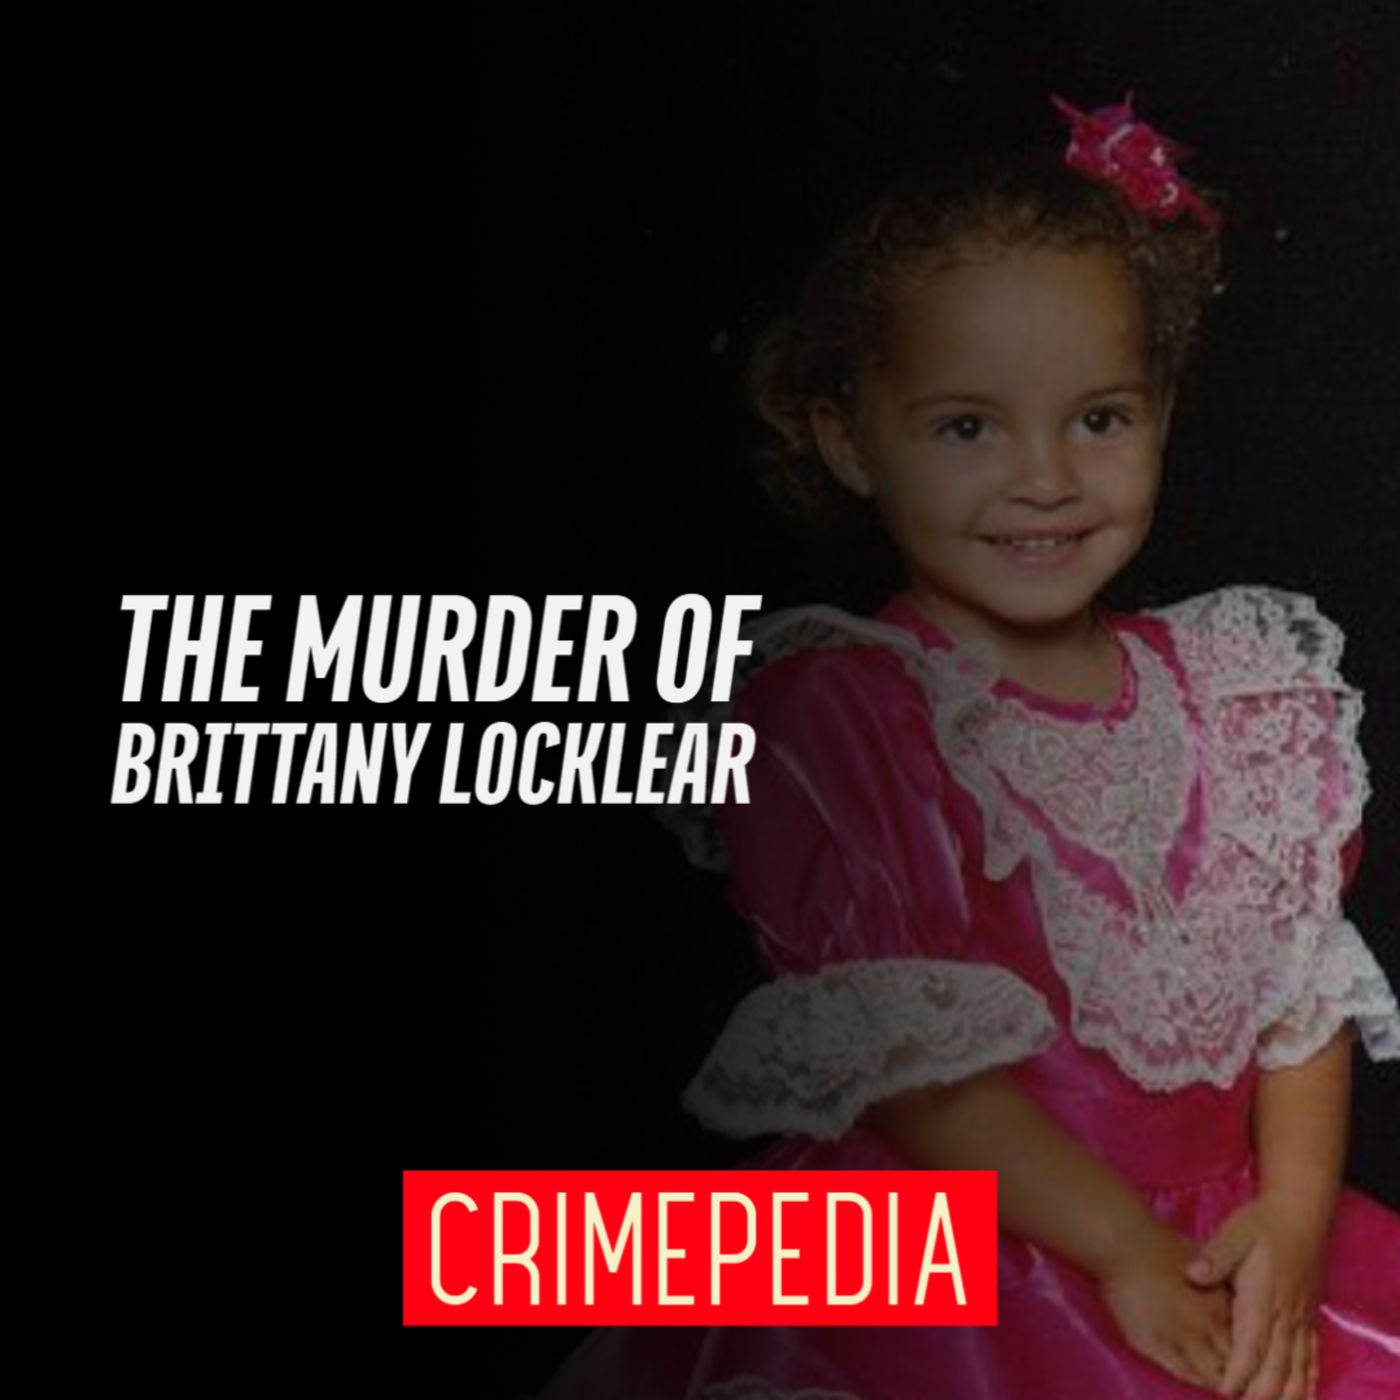 The Murder of Brittany Locklear